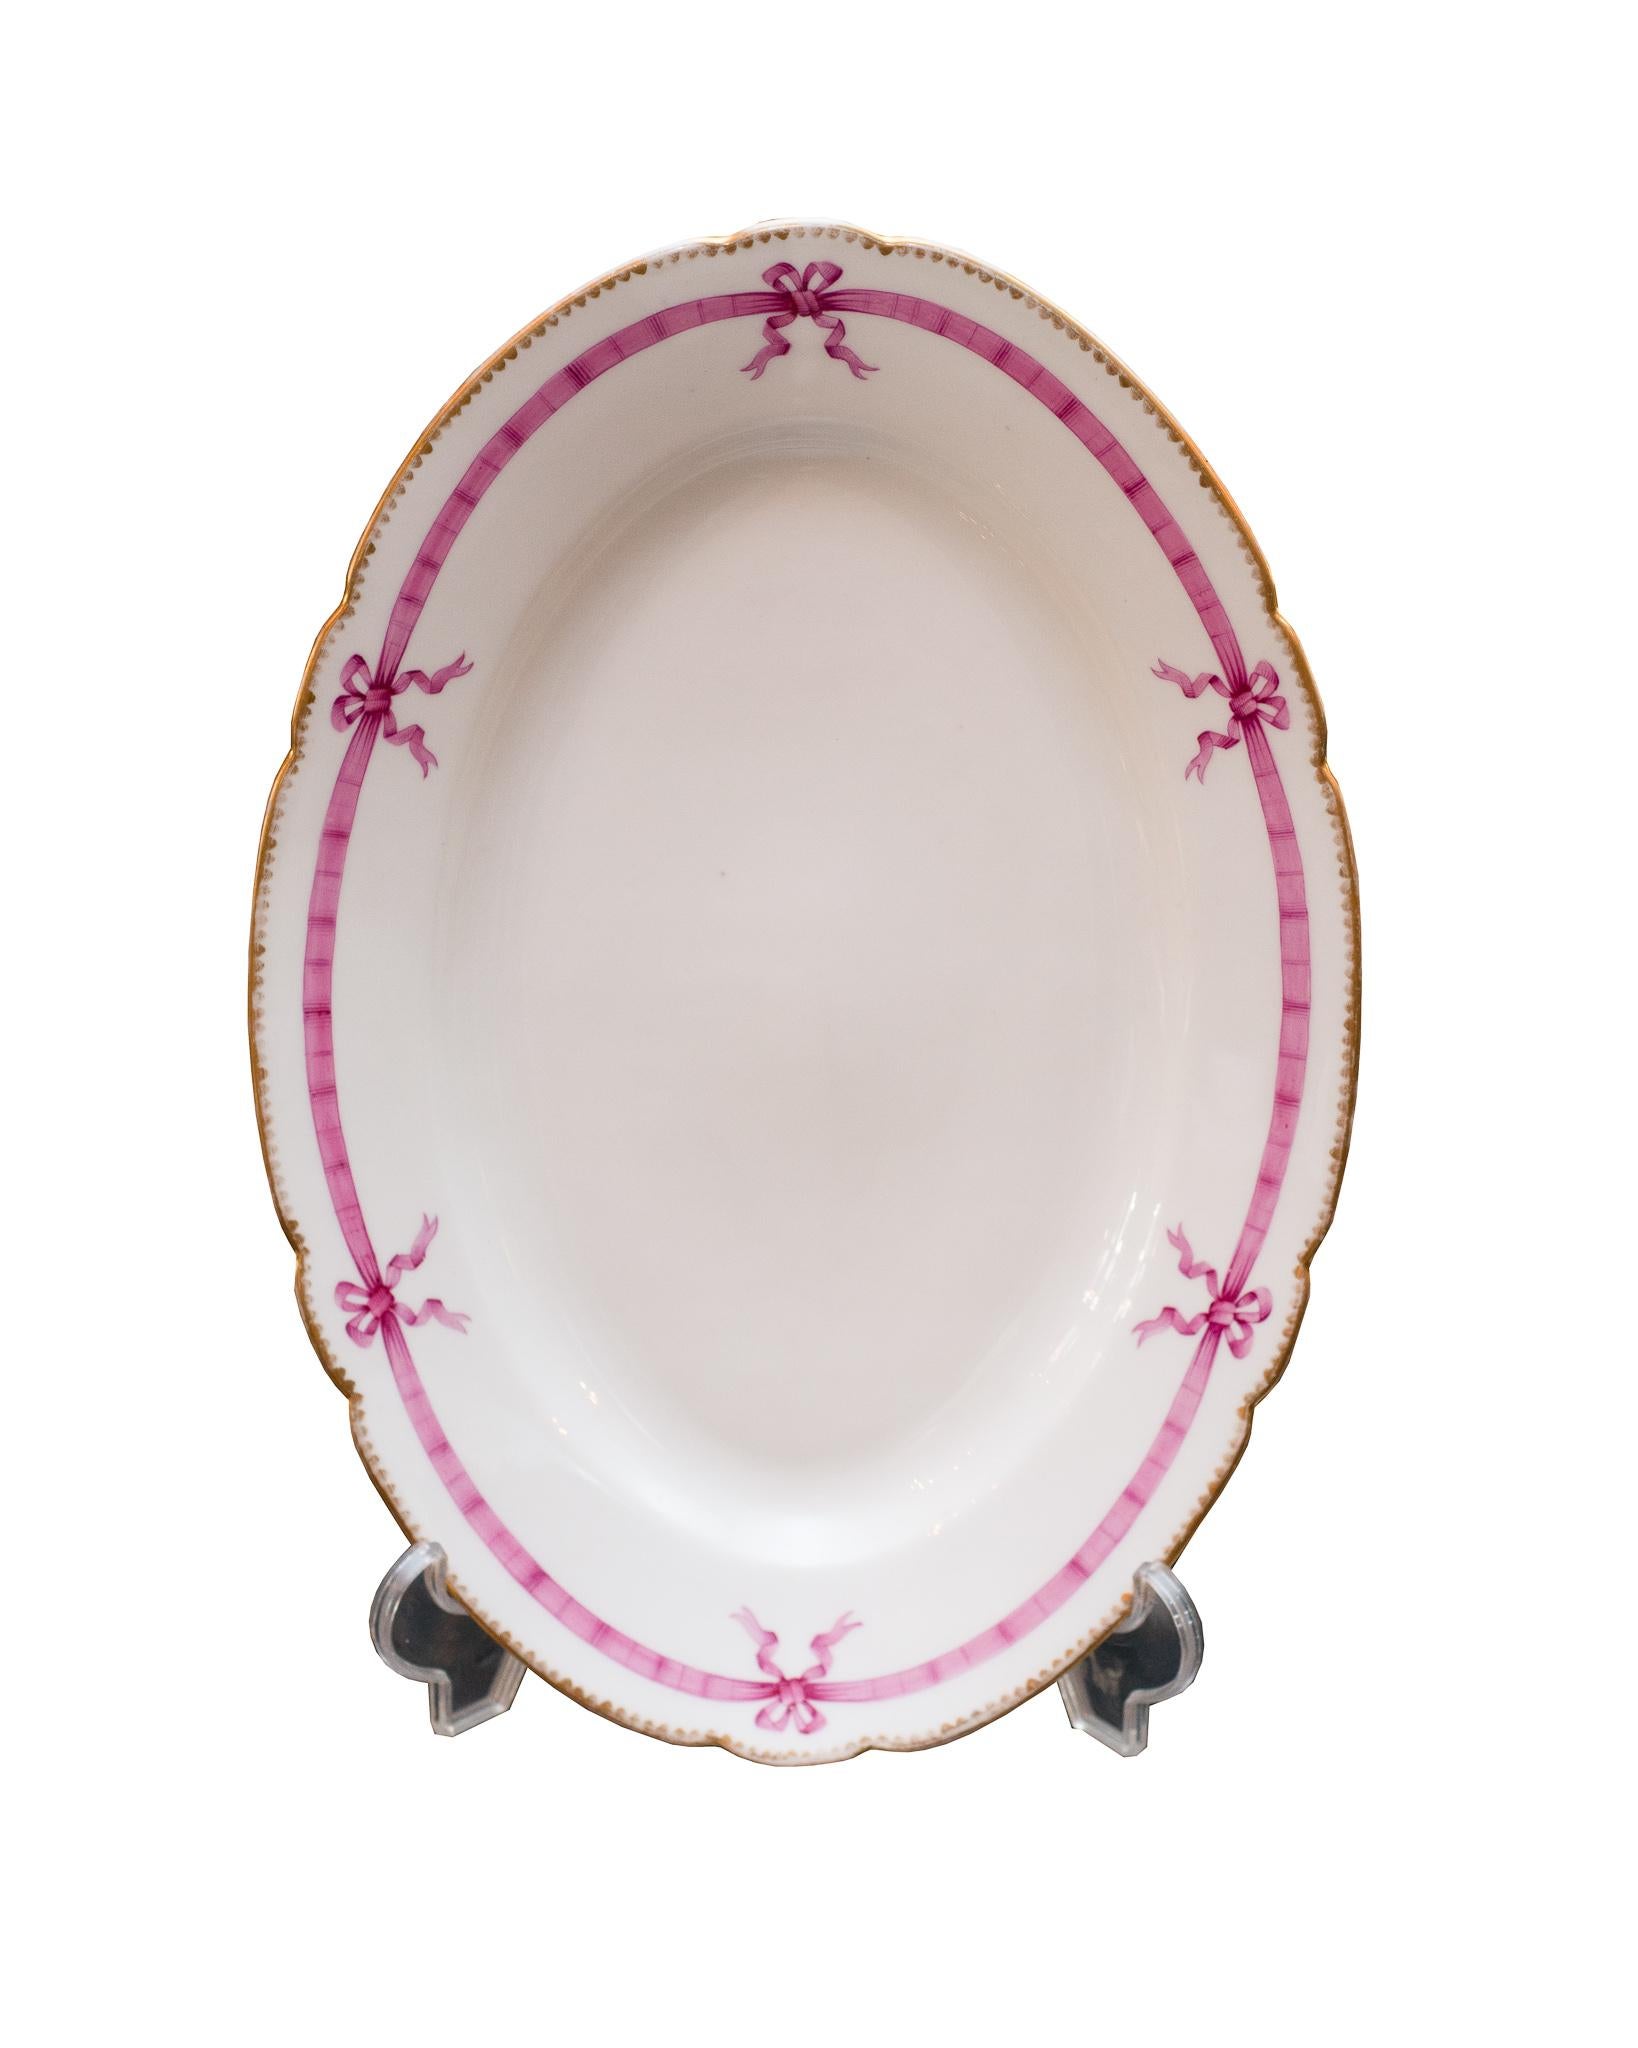 Antique French 22-Piece White Porcelain Dinner Set with Pink Ribbon Motif In Fair Condition For Sale In Toronto, ON